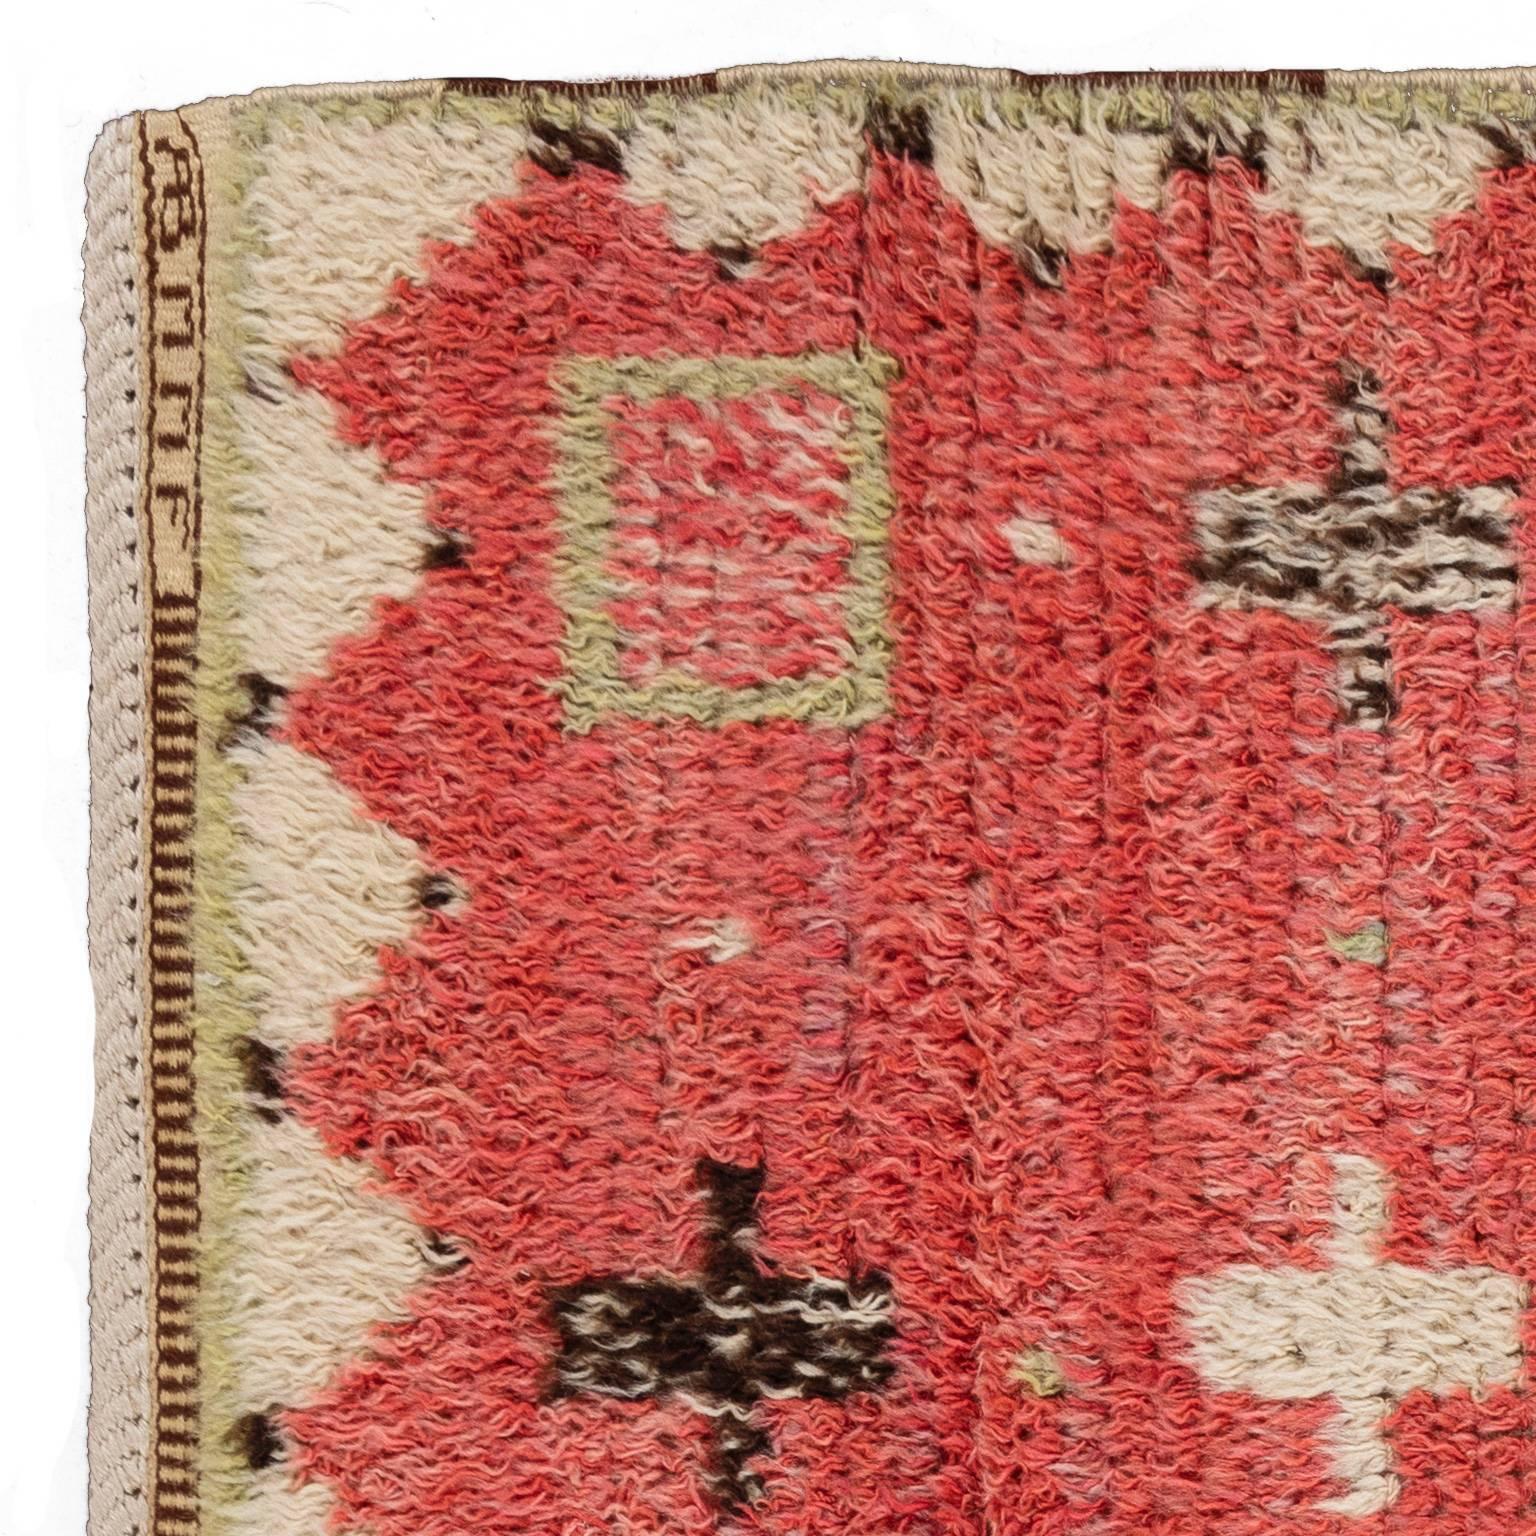 This wonderful vintage half pile rug will add sparkling glamor to your home. Signed by the master weaver AB MMF and Barbro Nilsson (BN) 1945. Pattern is “Rödlock”, (”Redcurls”) half-pile (flossa) rug. Some places are hard worn. The difference